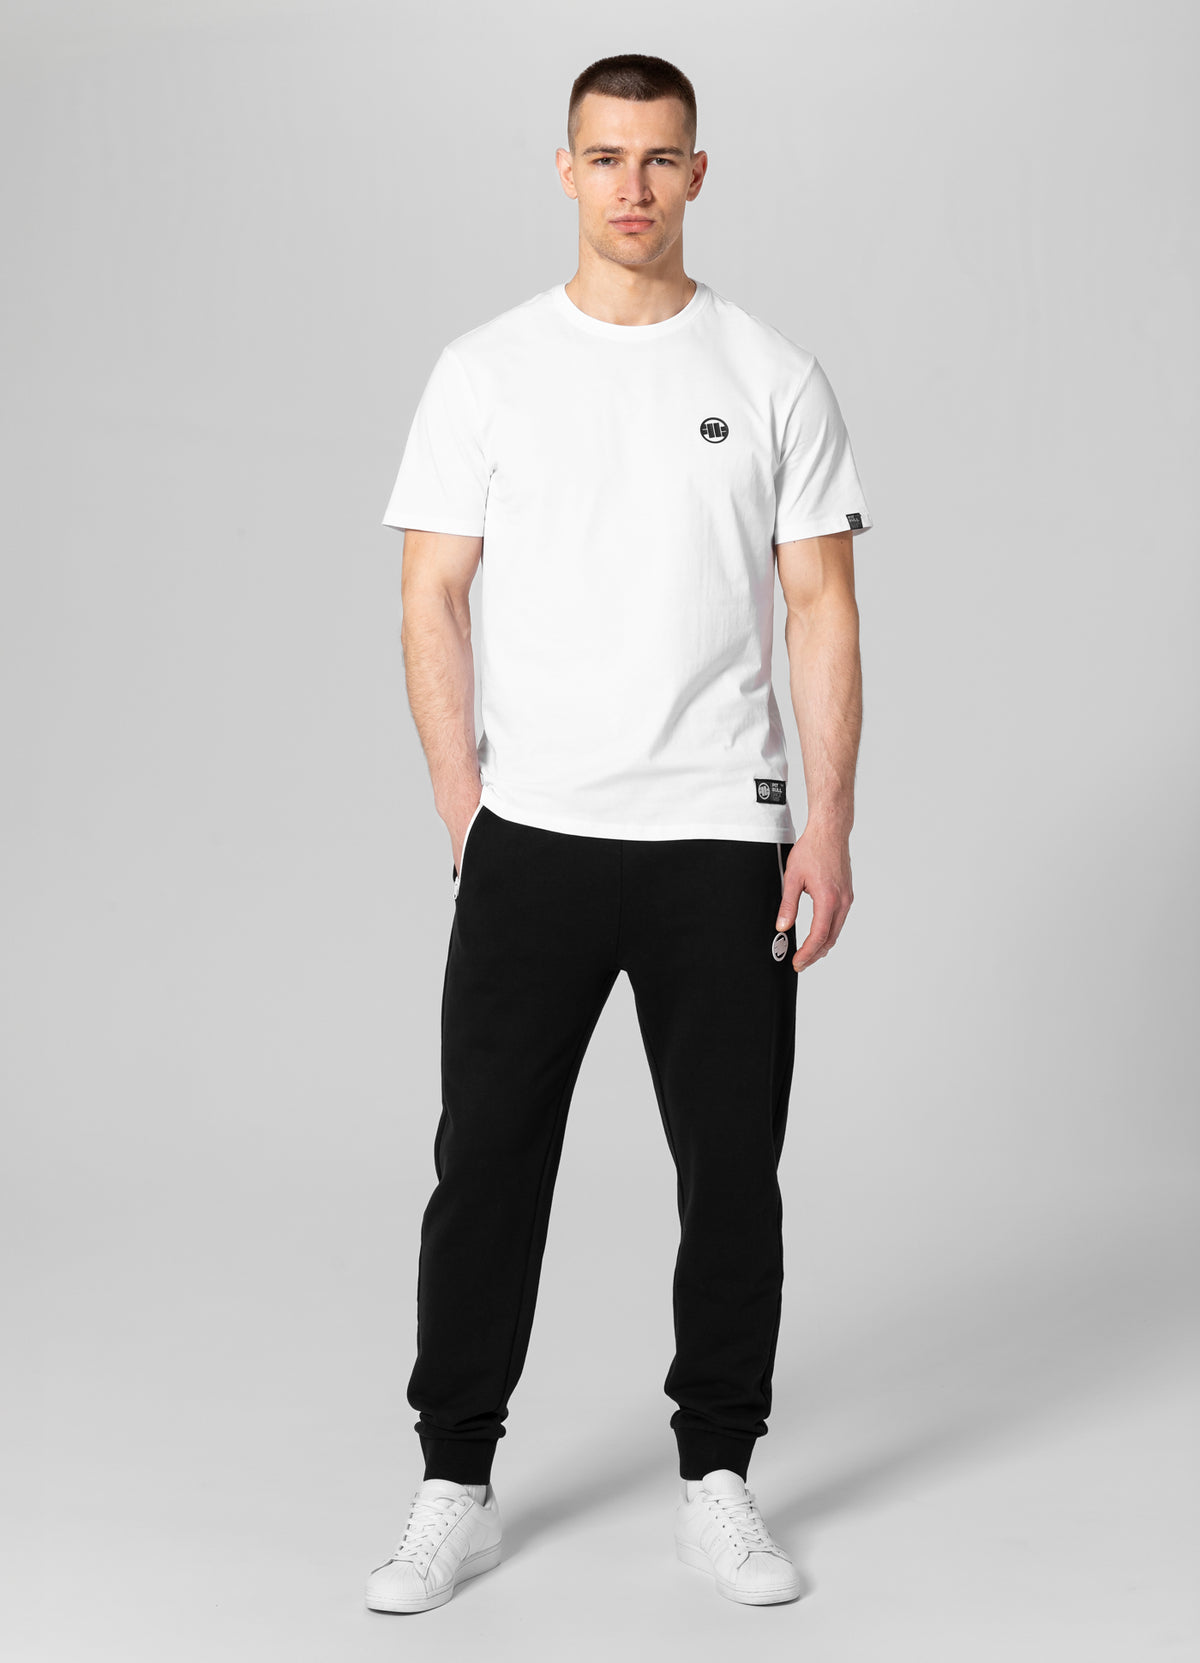 TERRY GROUP Black Track Pants